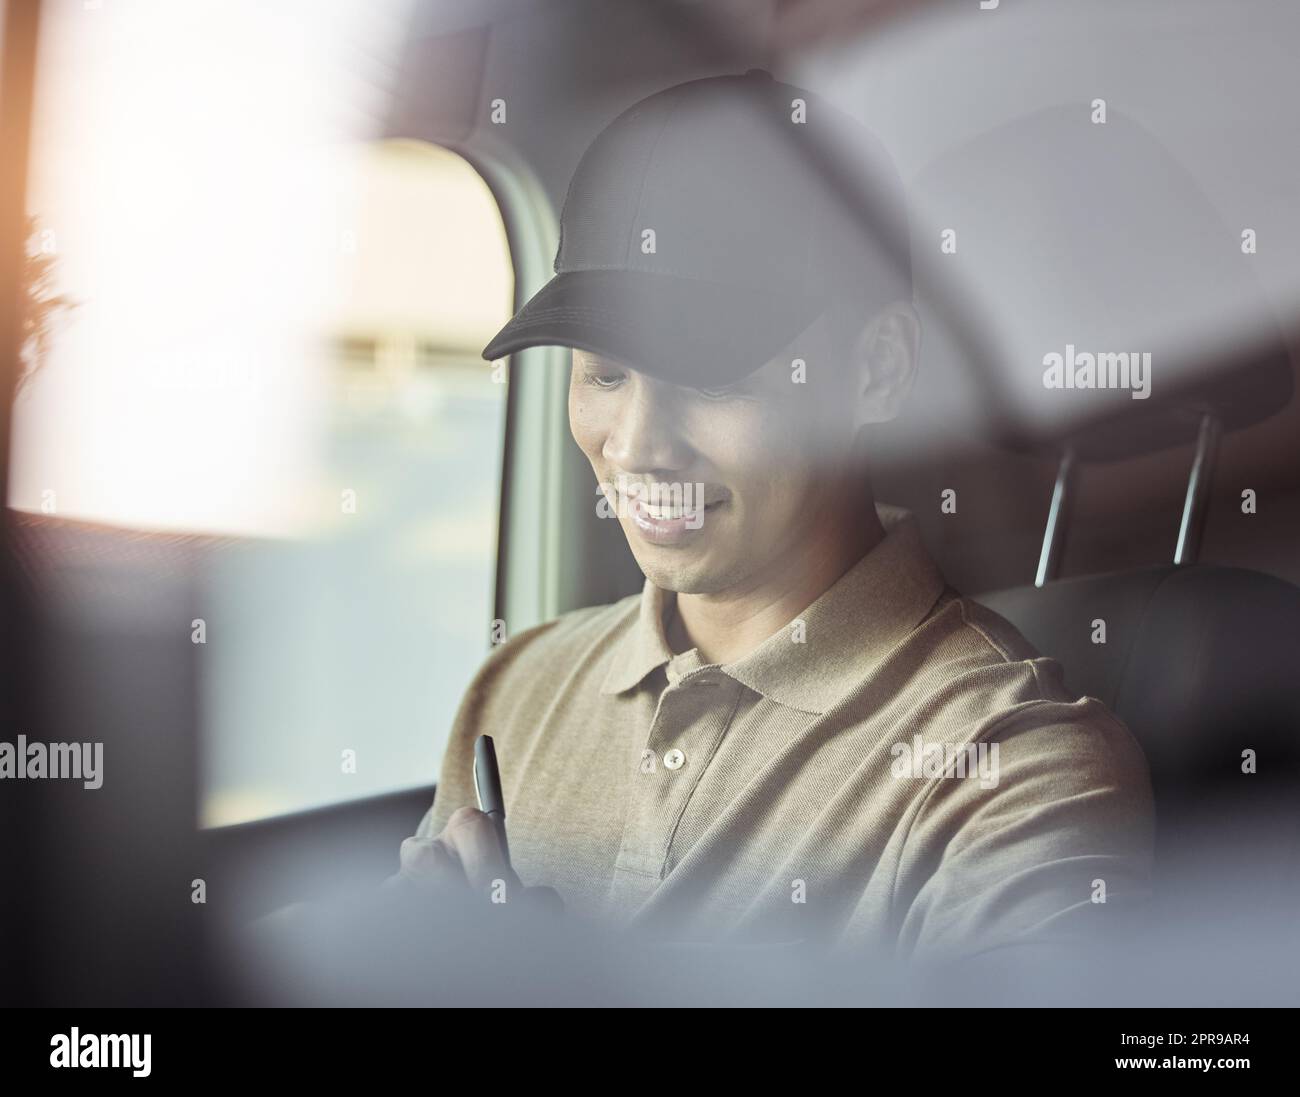 Bringing people joy daily. a delivery checking his deliveries before dropping them off. Stock Photo